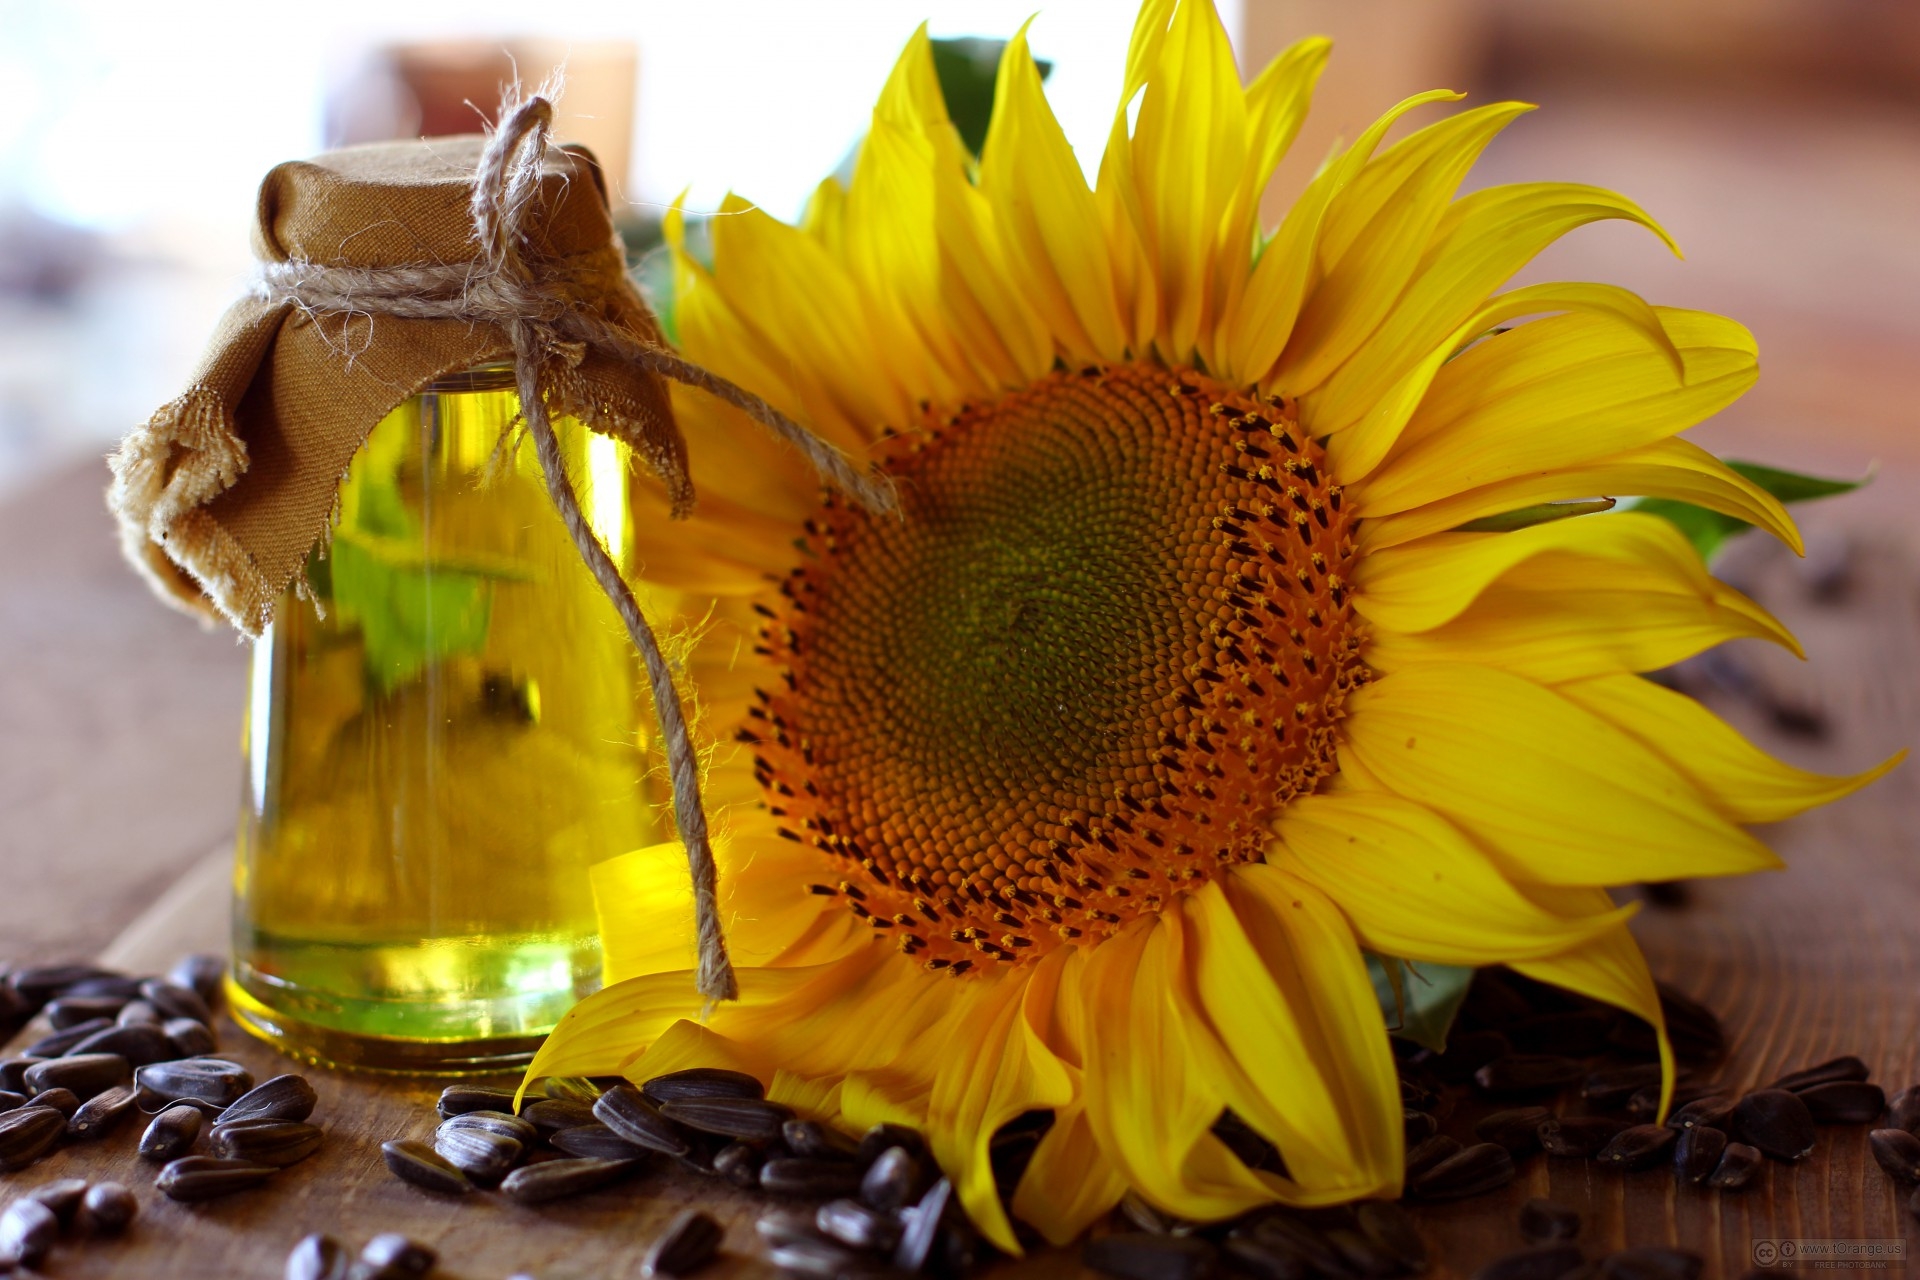 After palm oil continues to become cheaper sunflower oil and sunflower